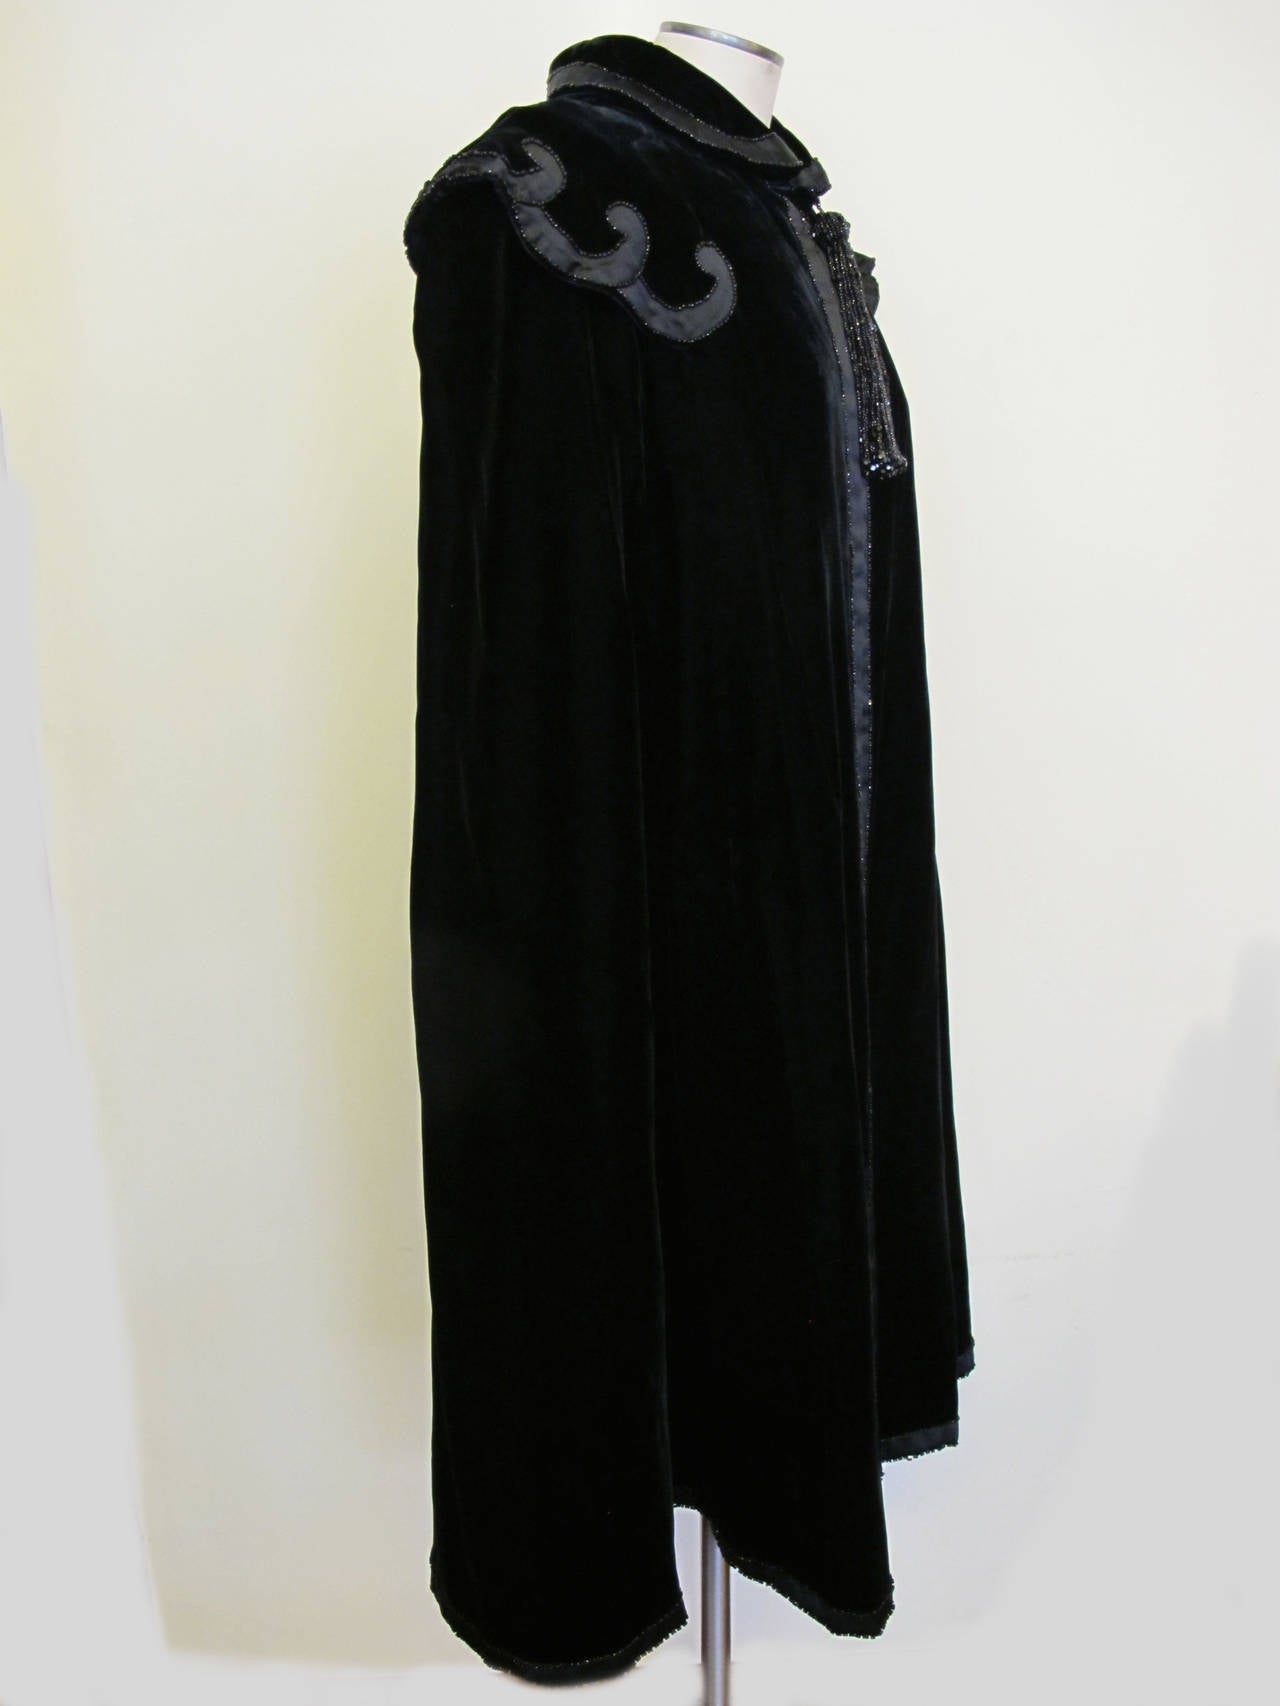 Iconic, luxurious Yves St. Laurent Rive Gauche Black Velvet Cape with scallop bugle beads and 7.5 inch Black Bugle Bead Tassel. Fits small to large due to
design of cape. Two black satin 3/4 inch panels with bugle beads adorn the front of the cape.